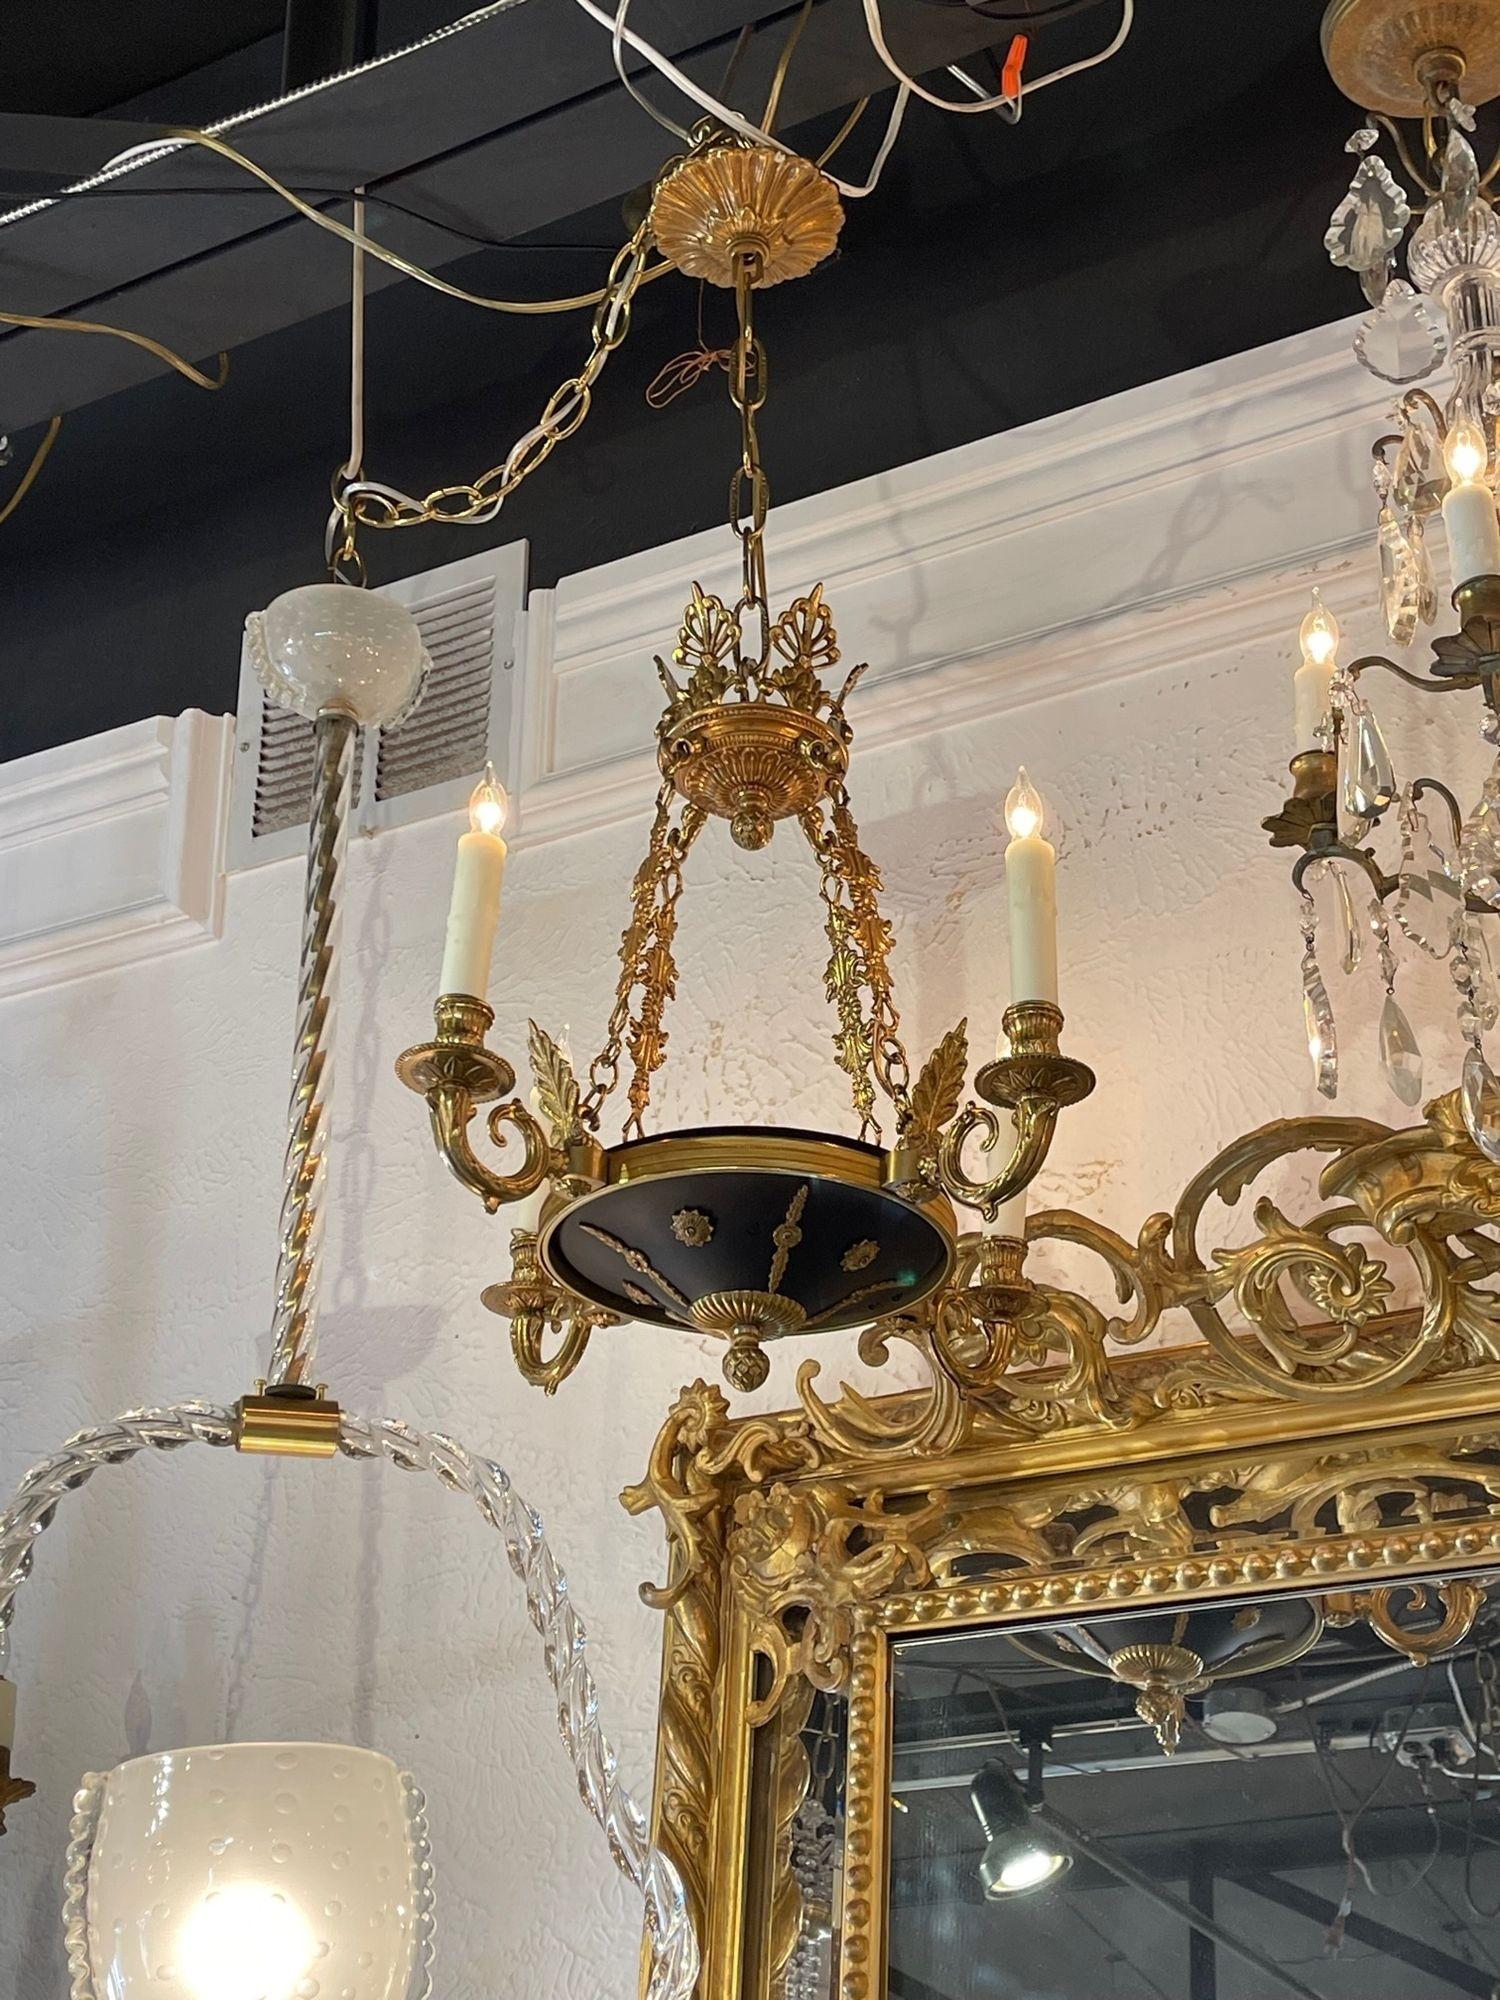 Petite French Empire 4-light bronze chandelier. Circa 1920. The chandelier has been professionally re-wired, cleaned and is ready to hang. Includes matching chain and canopy.